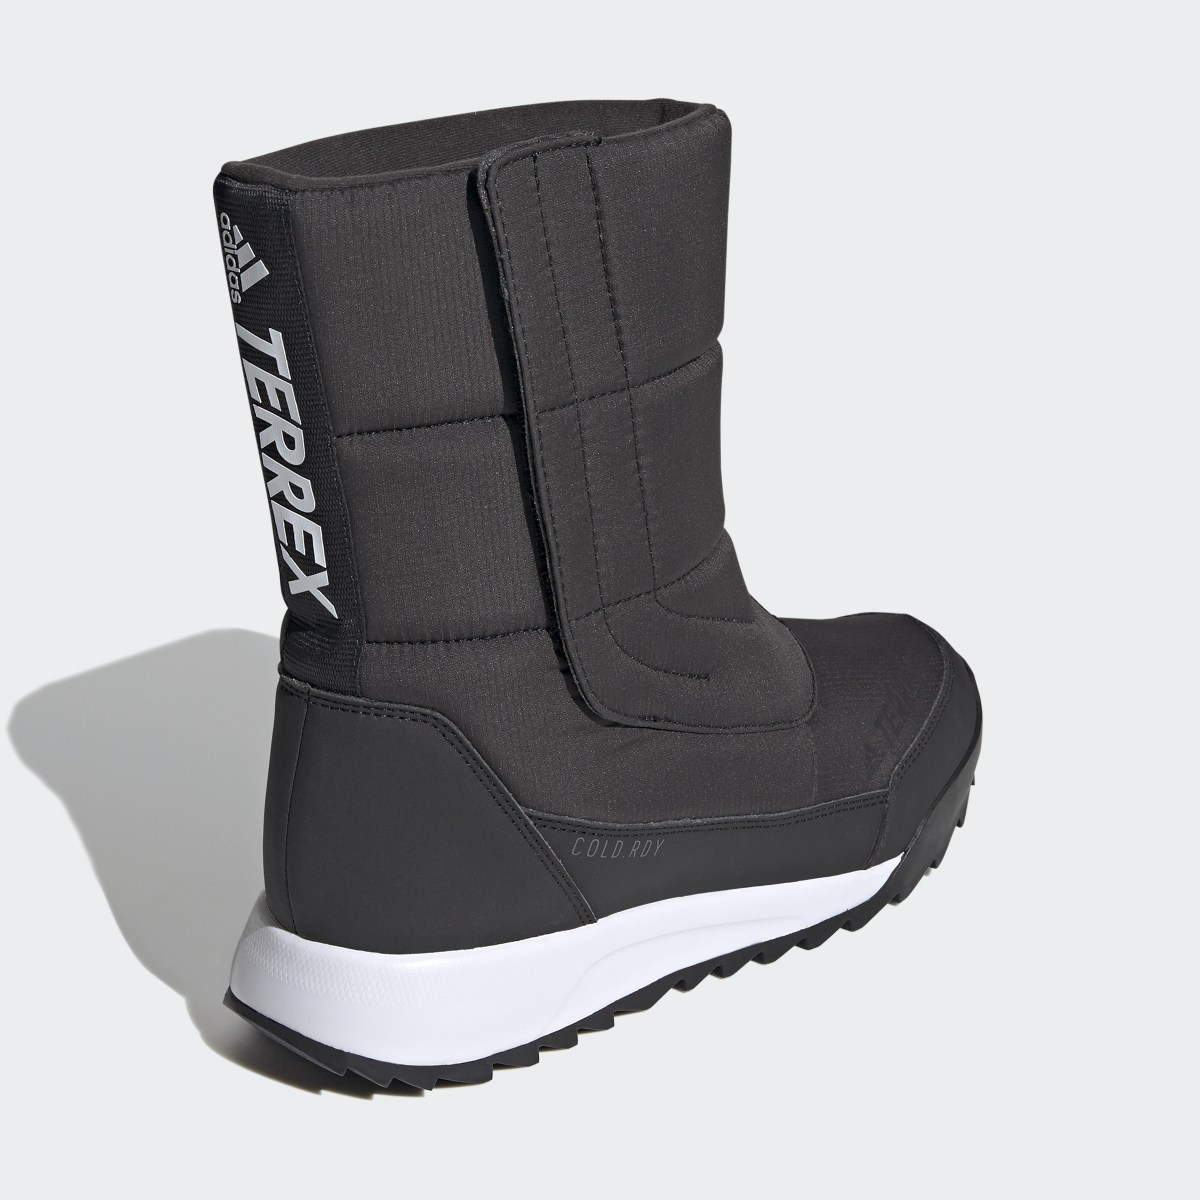 Adidas Terrex Choleah COLD.RDY Boots. 7